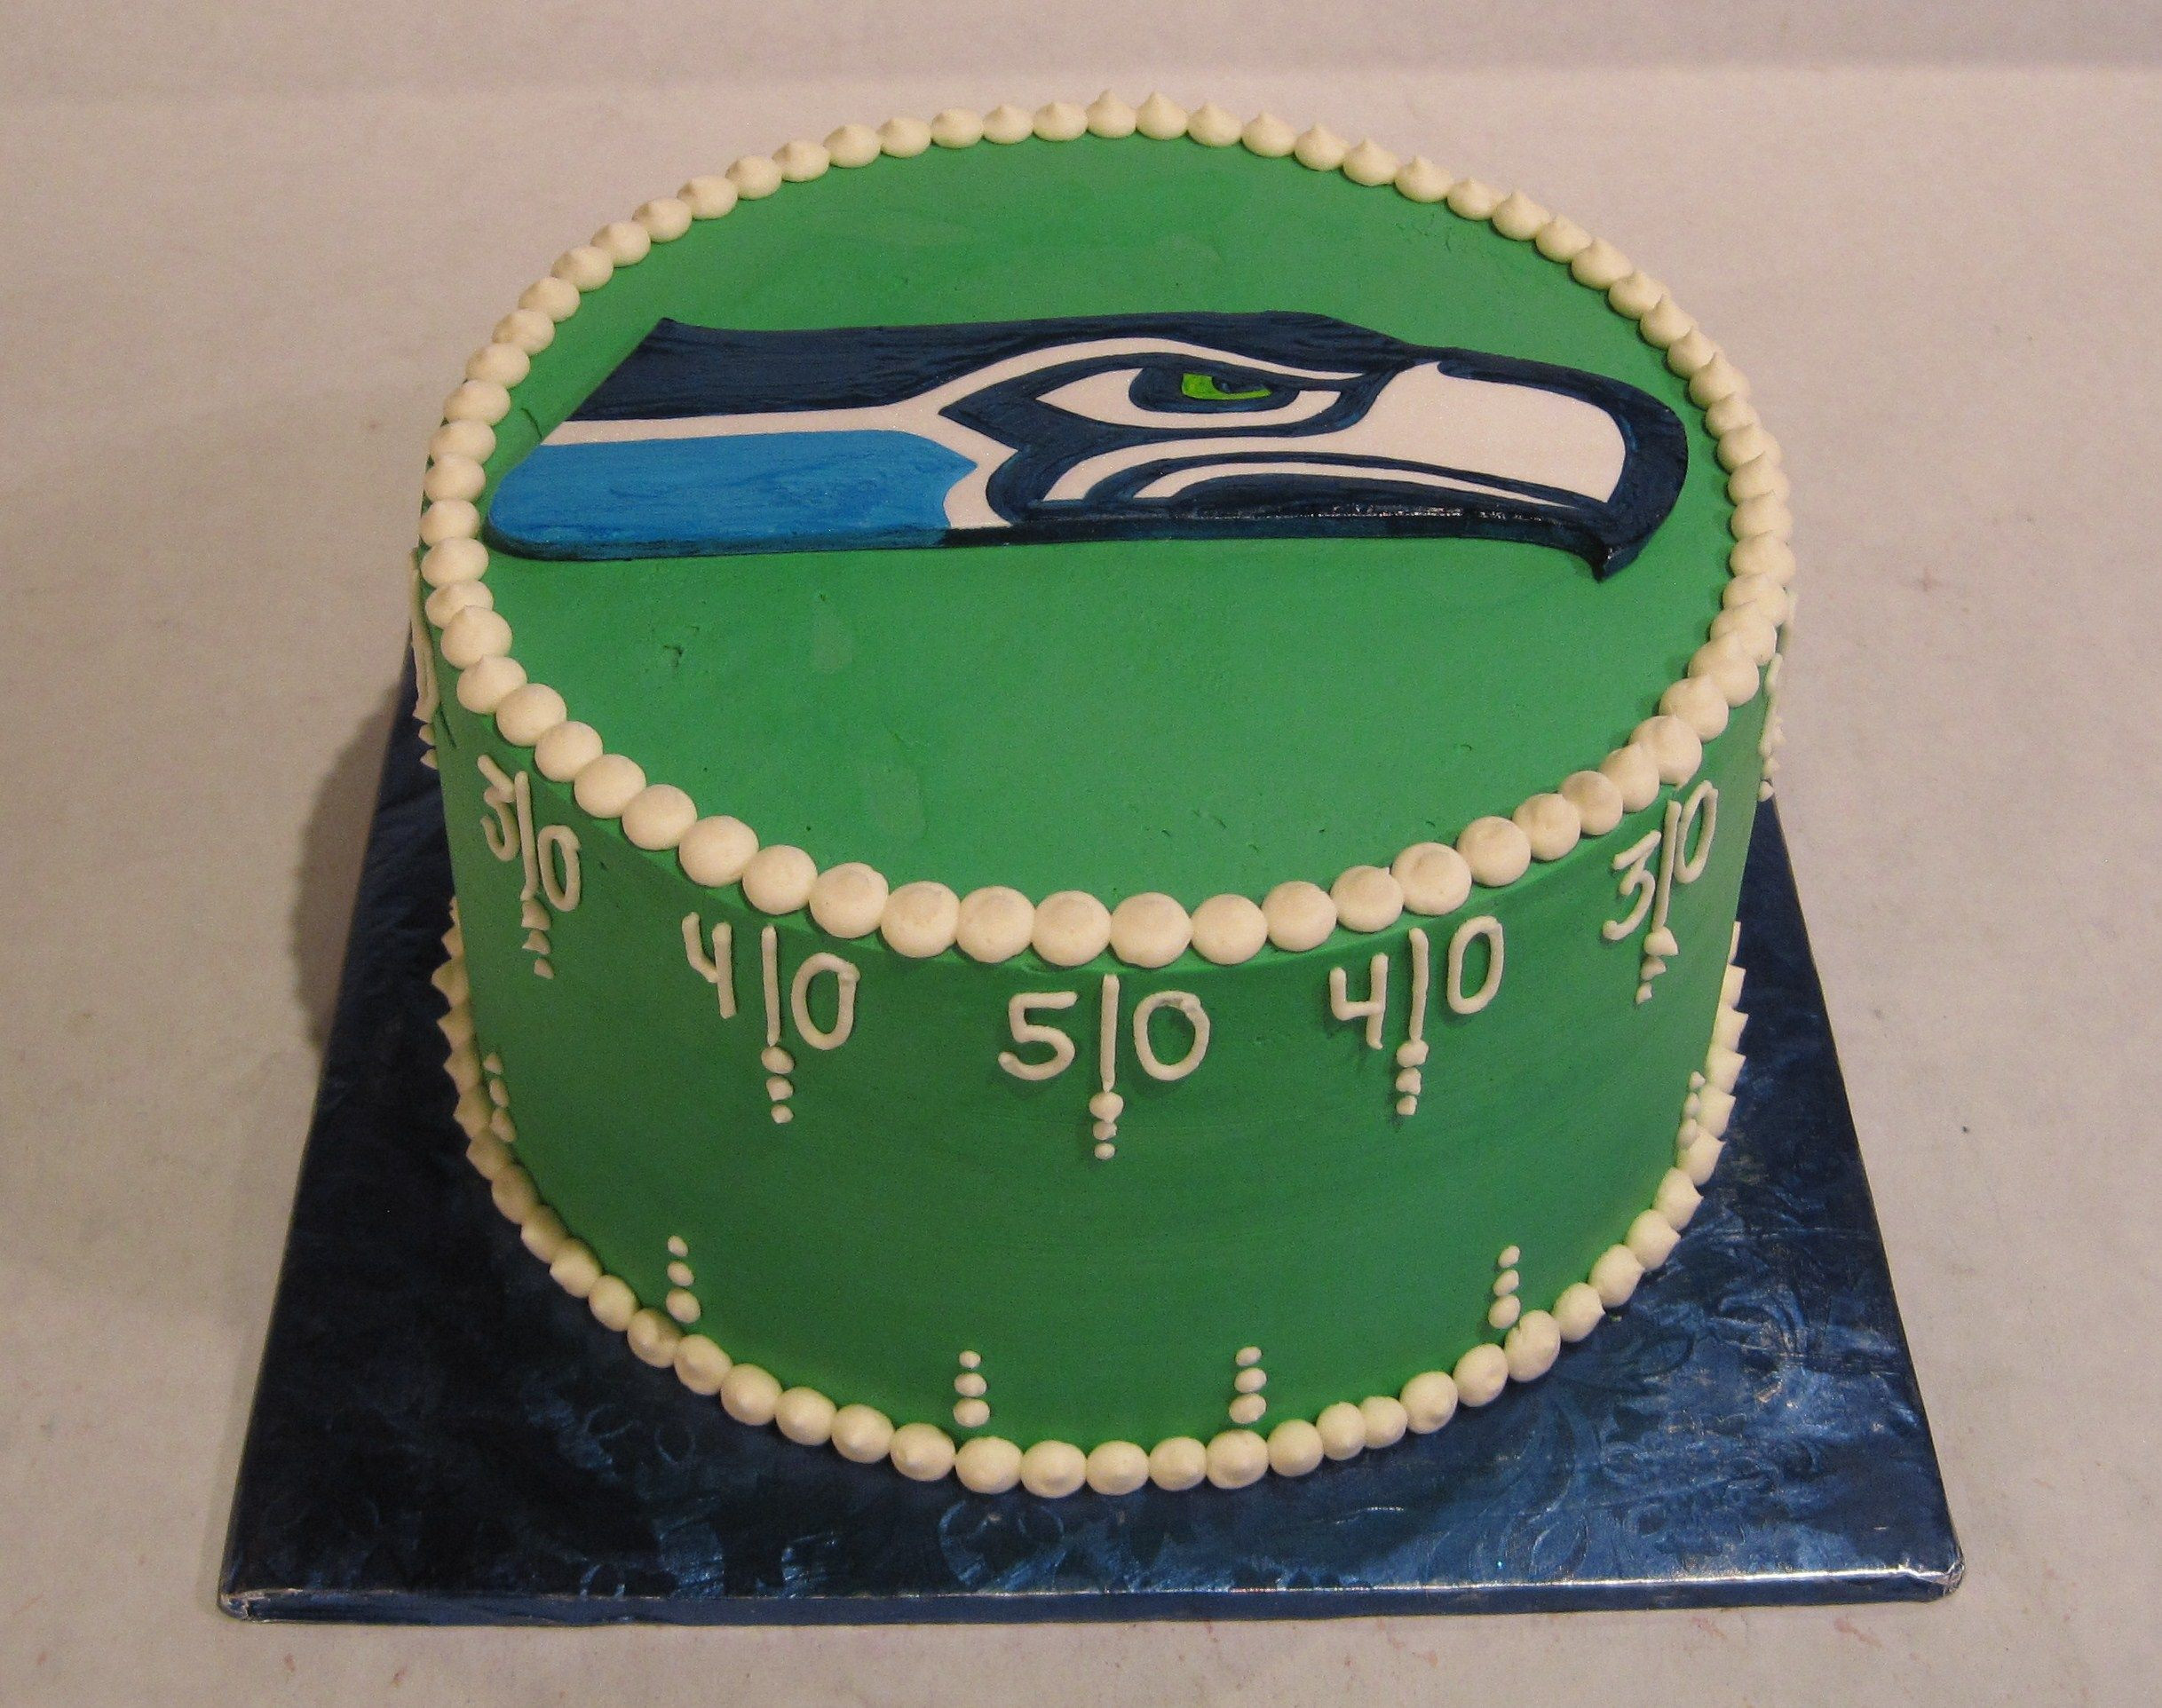 Birthday Cake Seattle
 Seahawks football cake With images